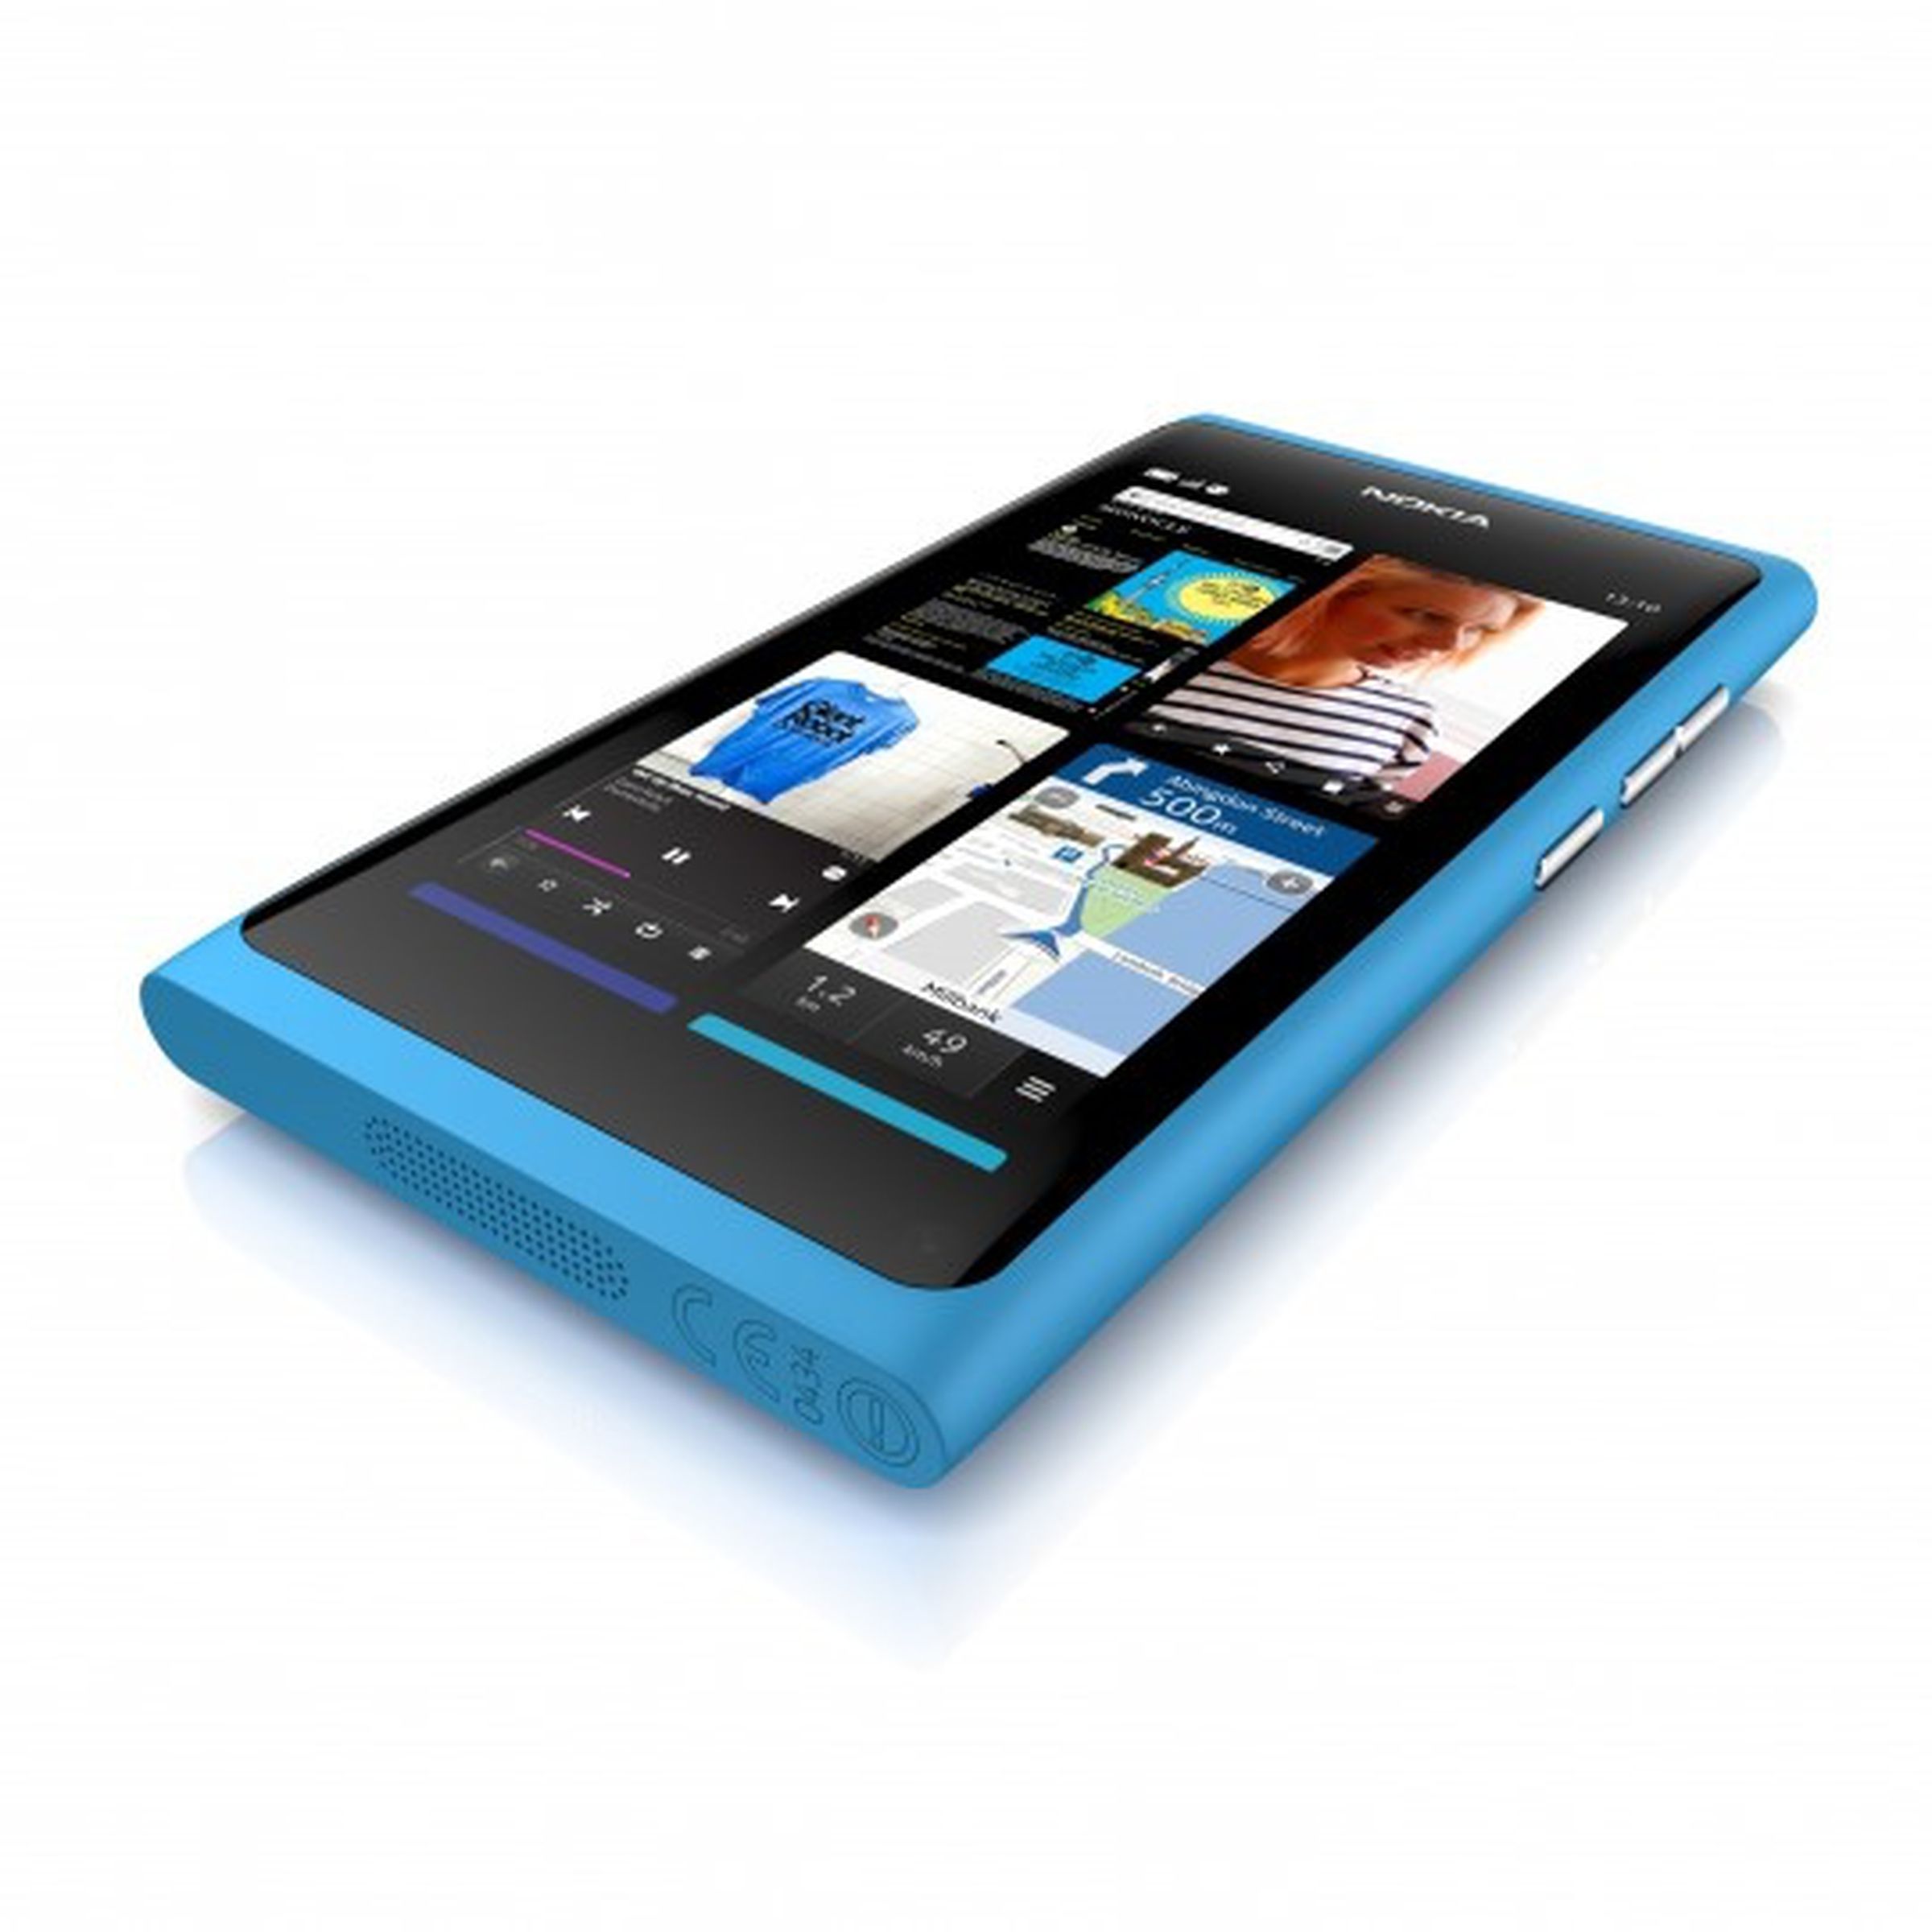 Nokia N9 officially announced: unibody design, buttonless ‘swipe’ UI, and the lost promise of MeeGo